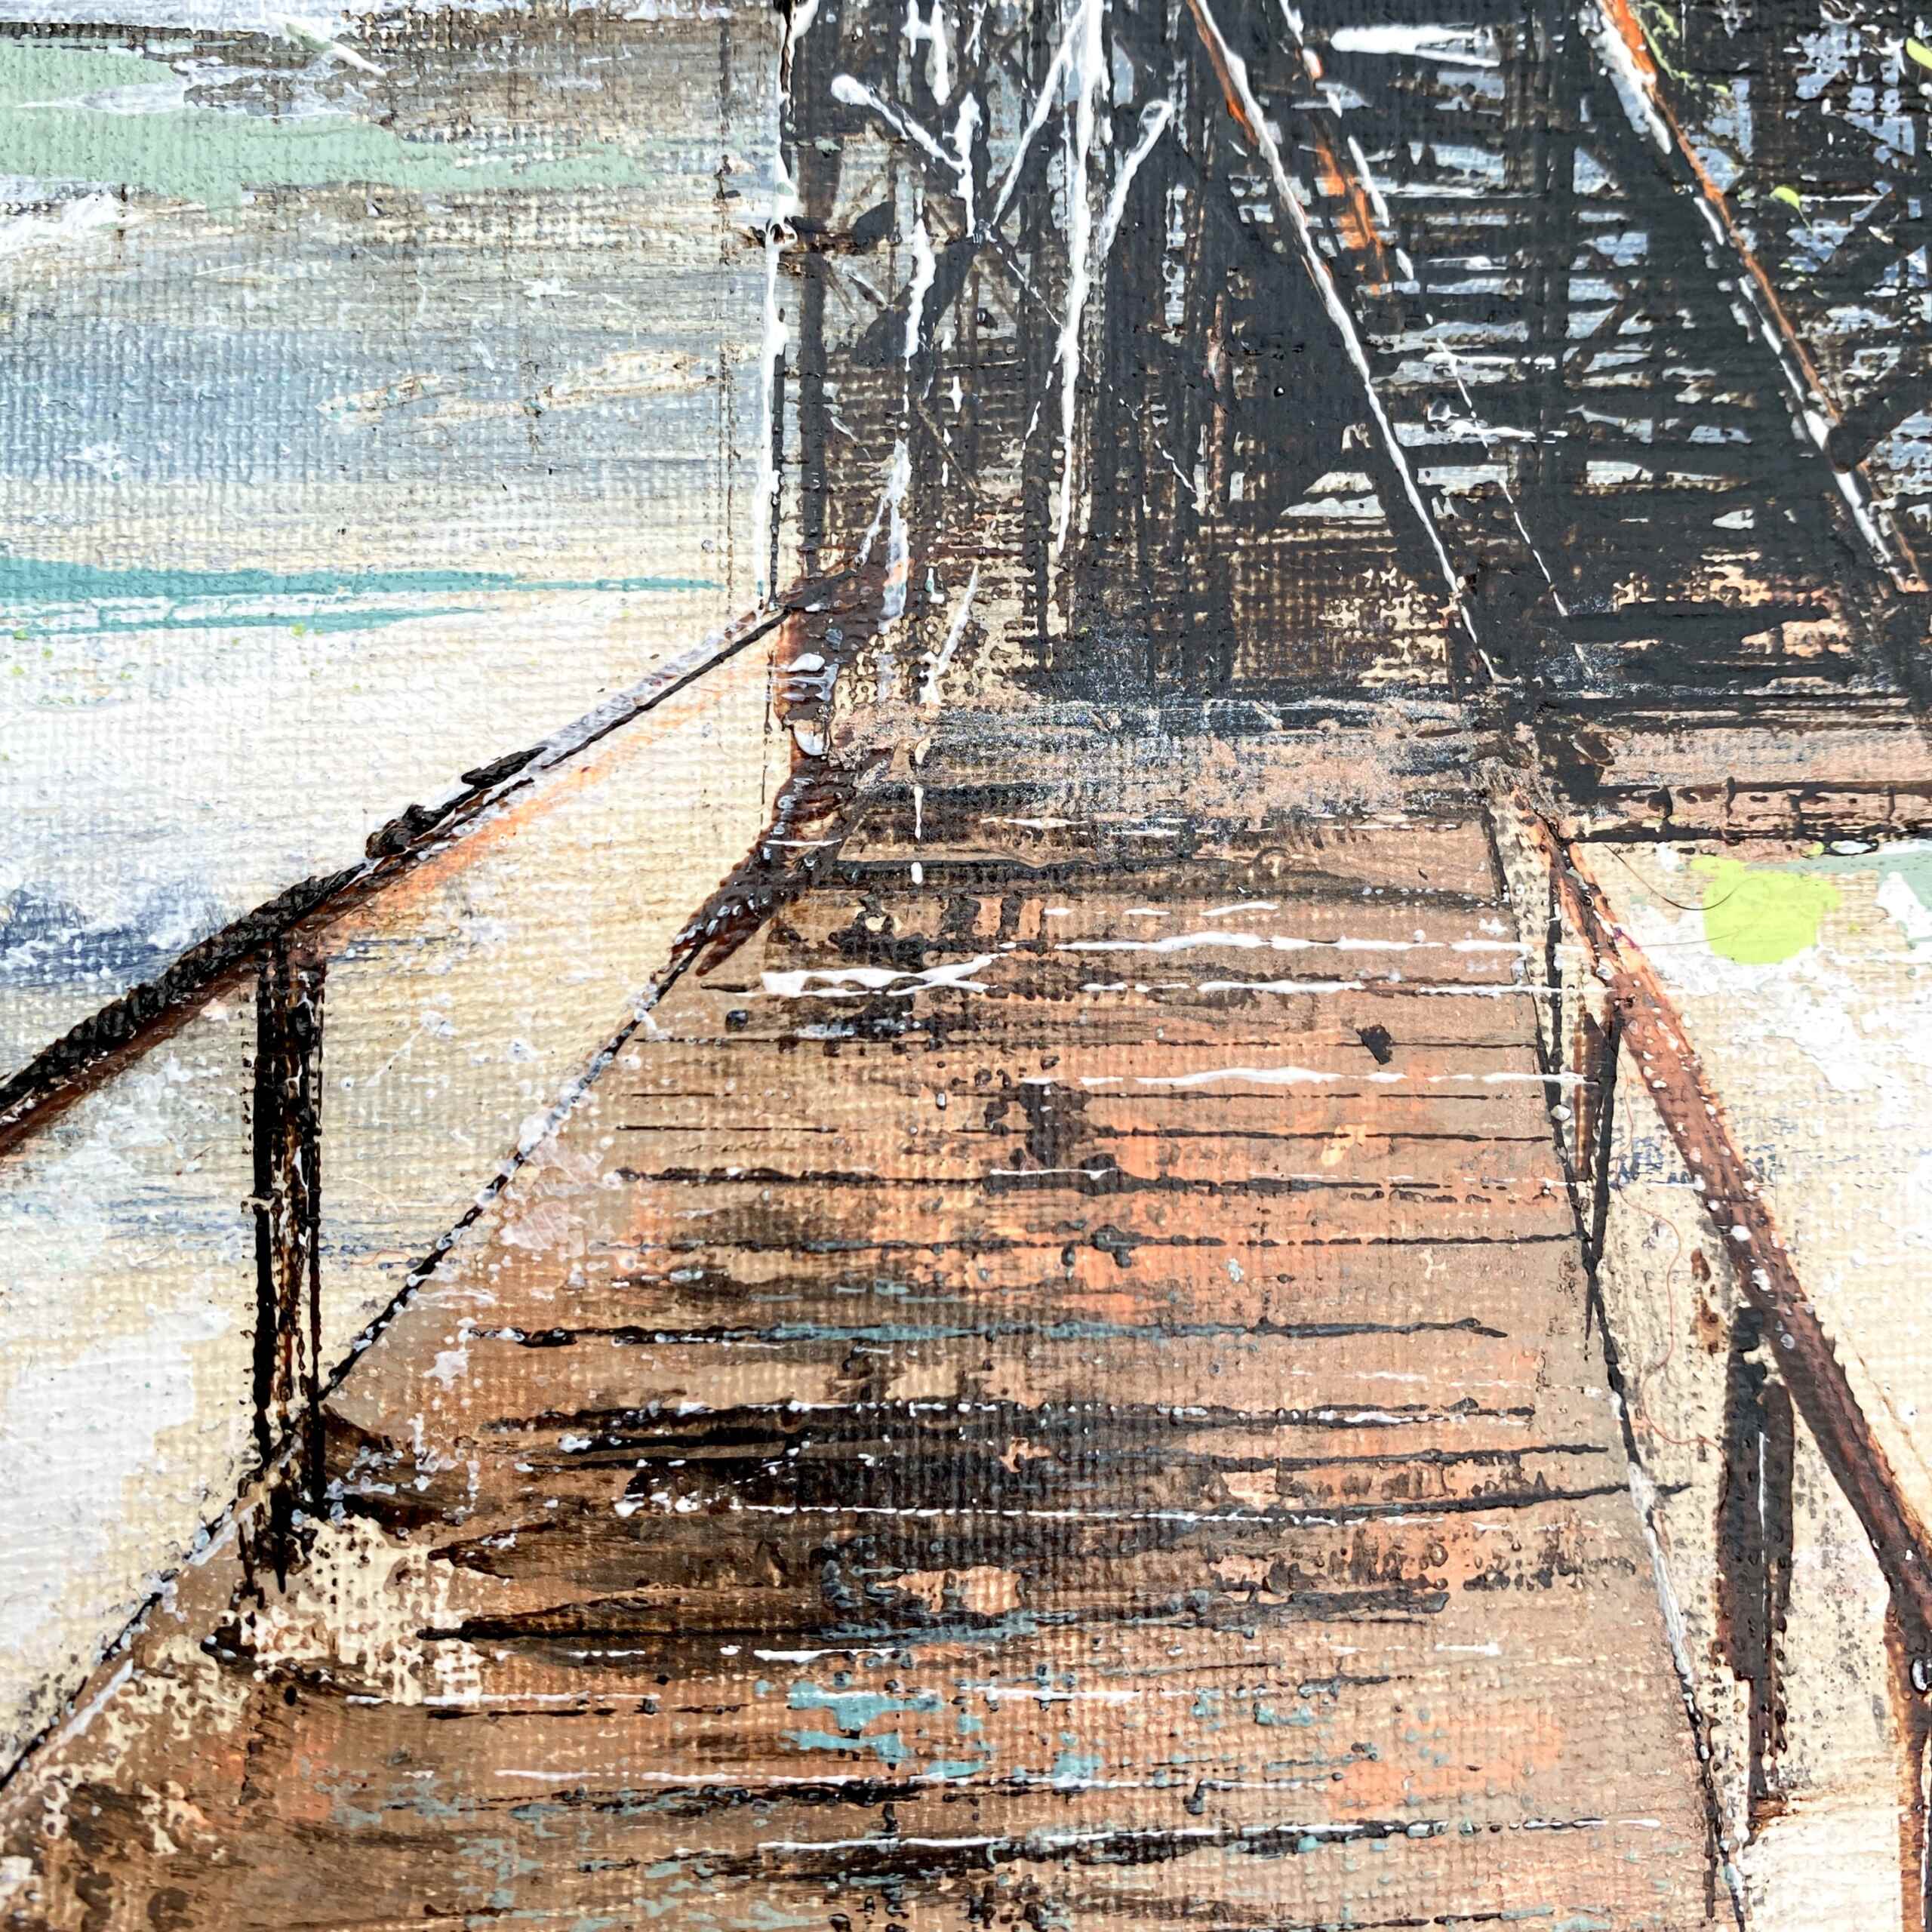 Detail of artwork "At Home by the Sea" by Nina Groth